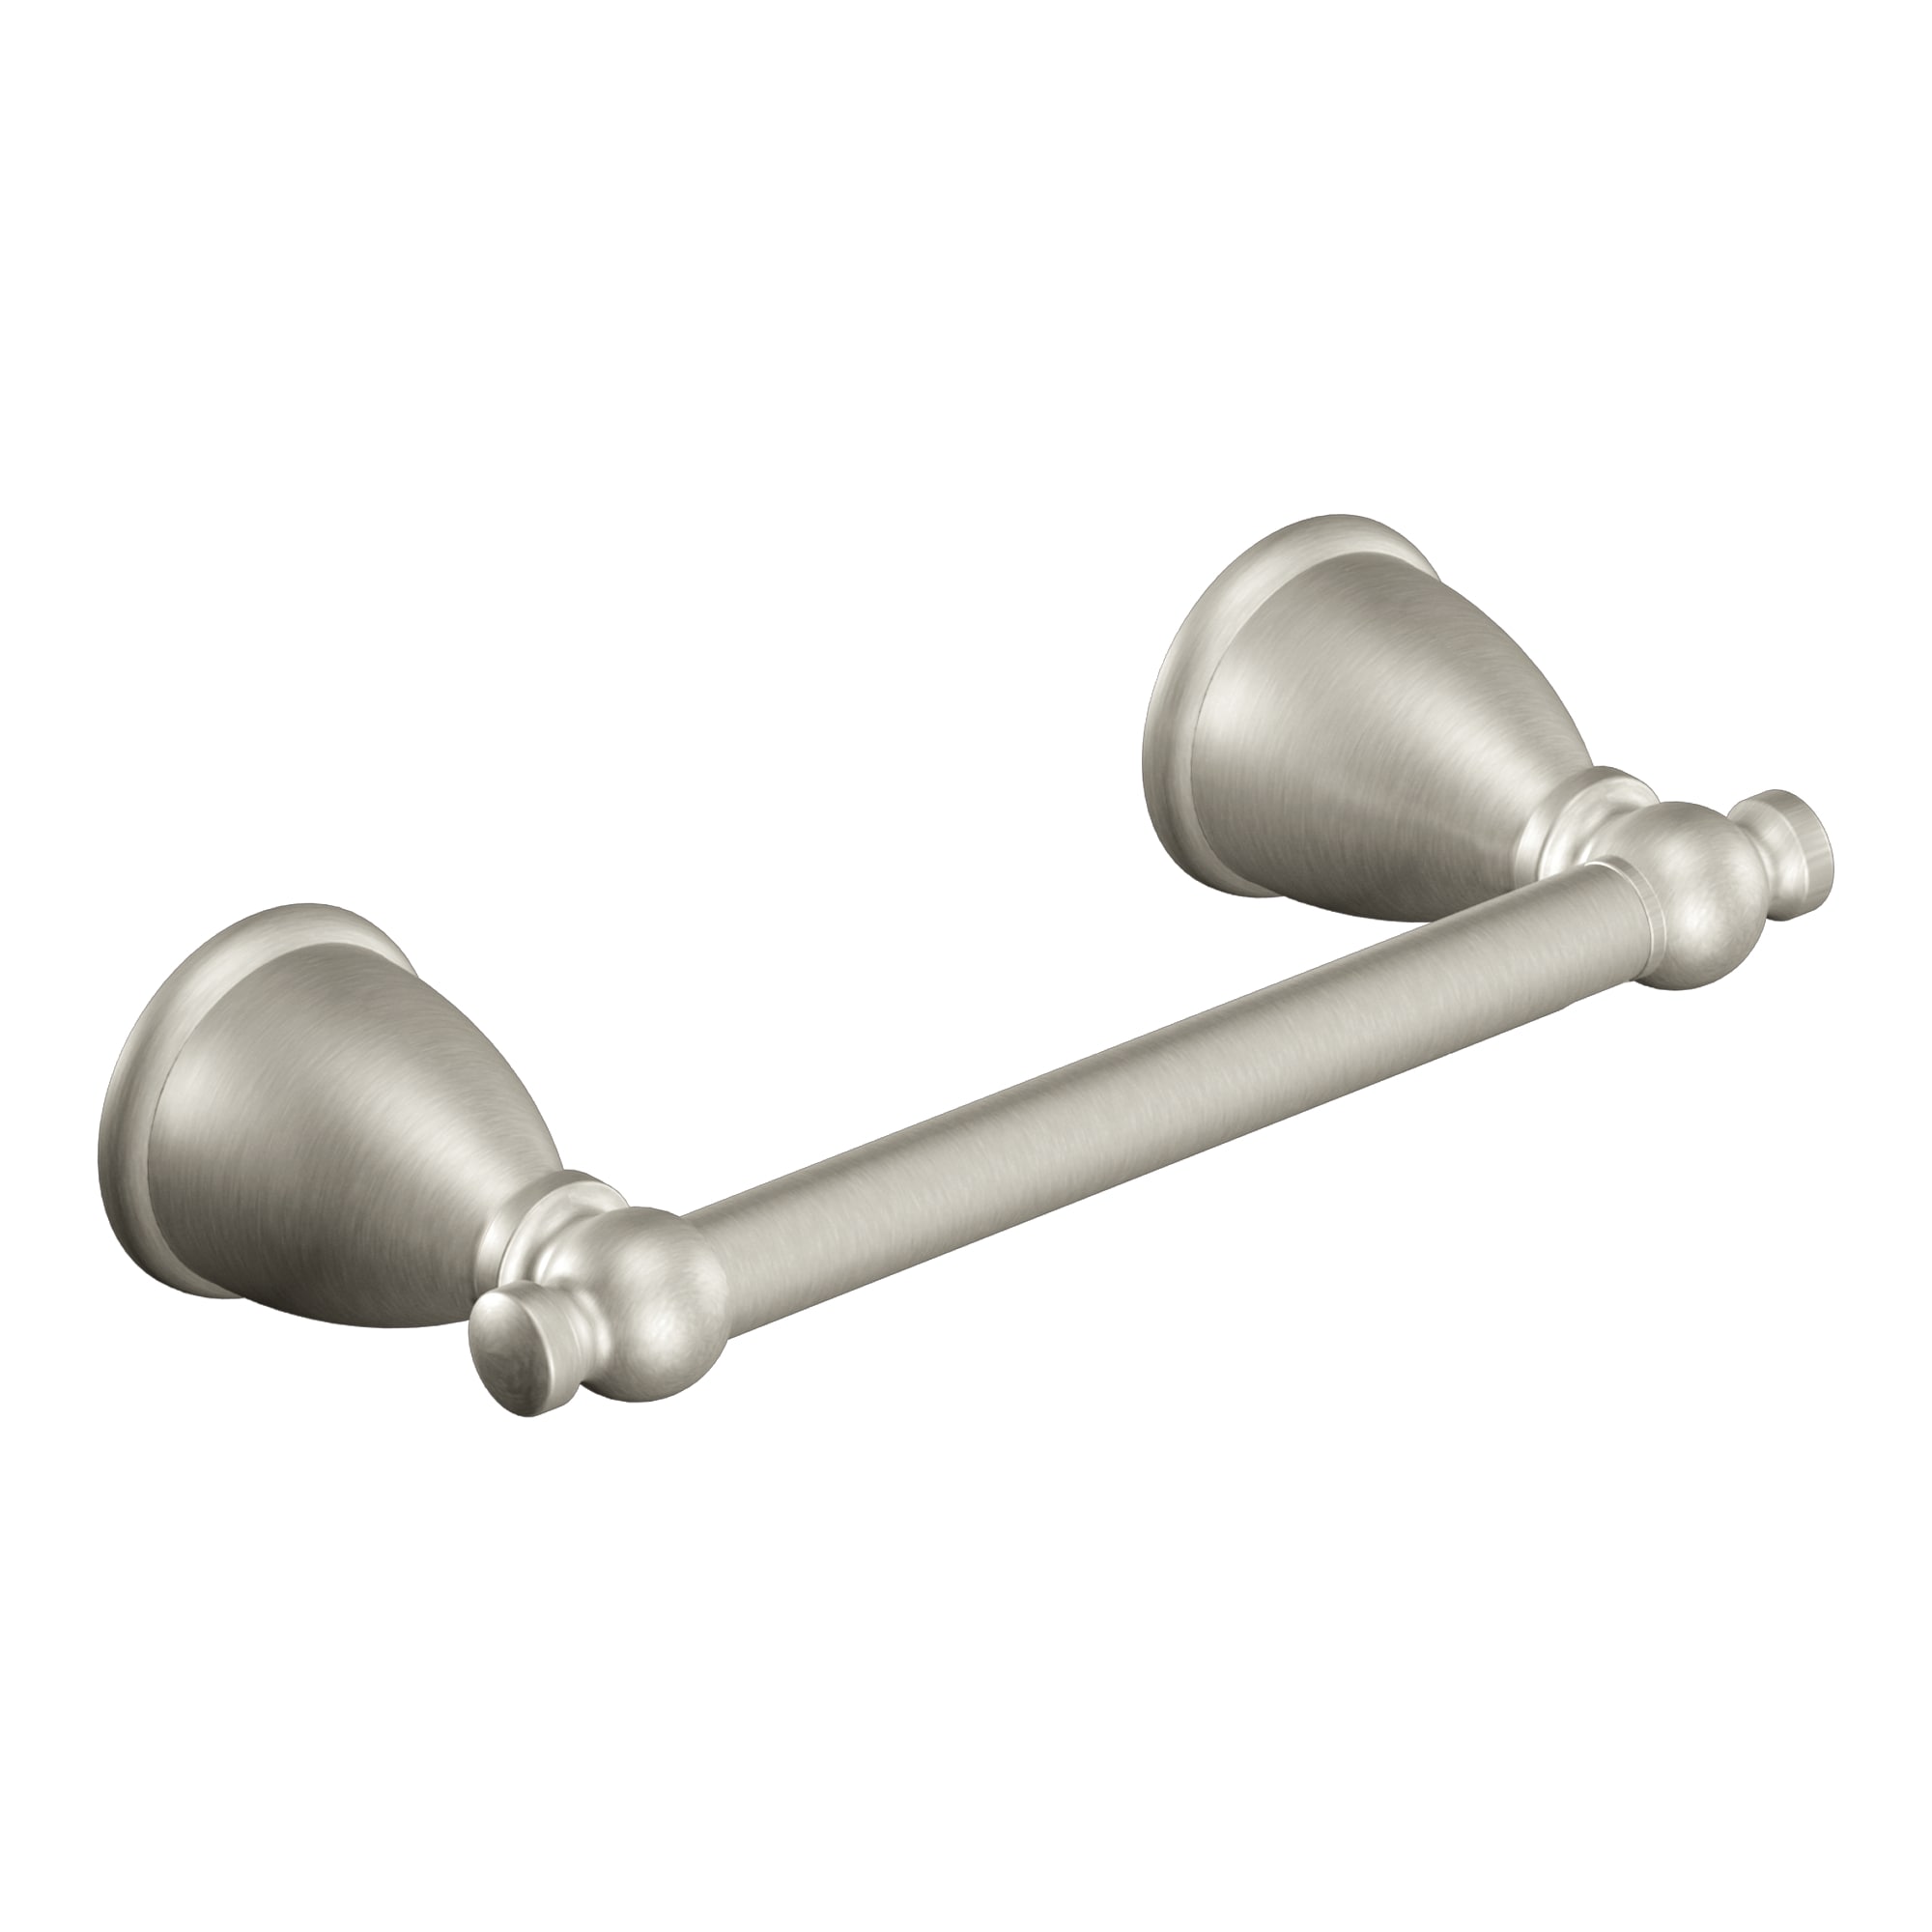 YHDSN Recessed Toilet Paper Holder Brushed Nickel, Contemporary